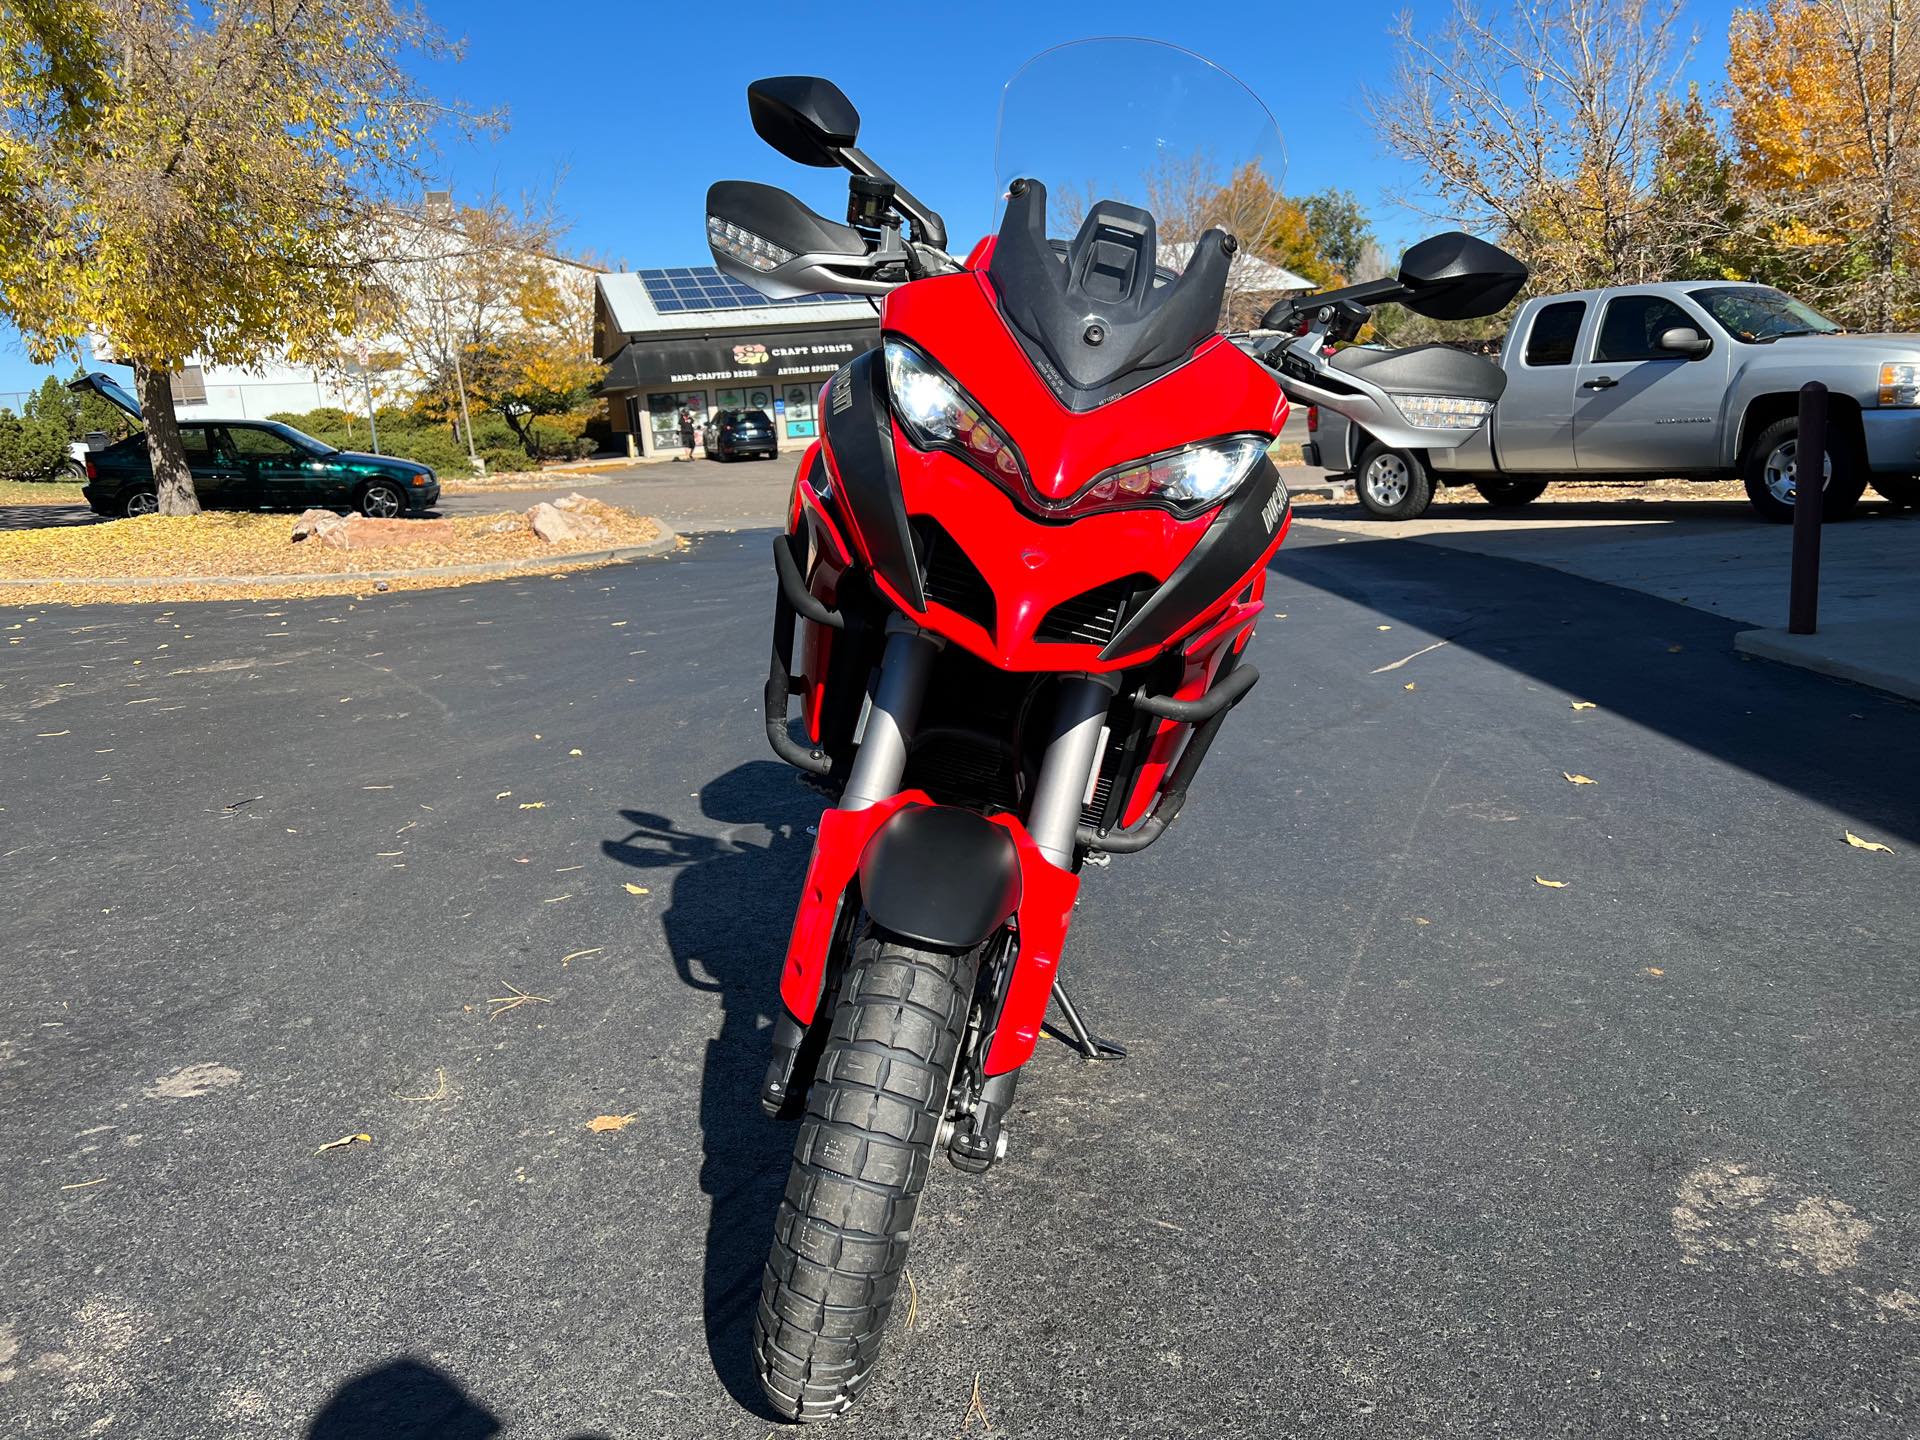 2017 Ducati Multistrada 1200 S at Aces Motorcycles - Fort Collins